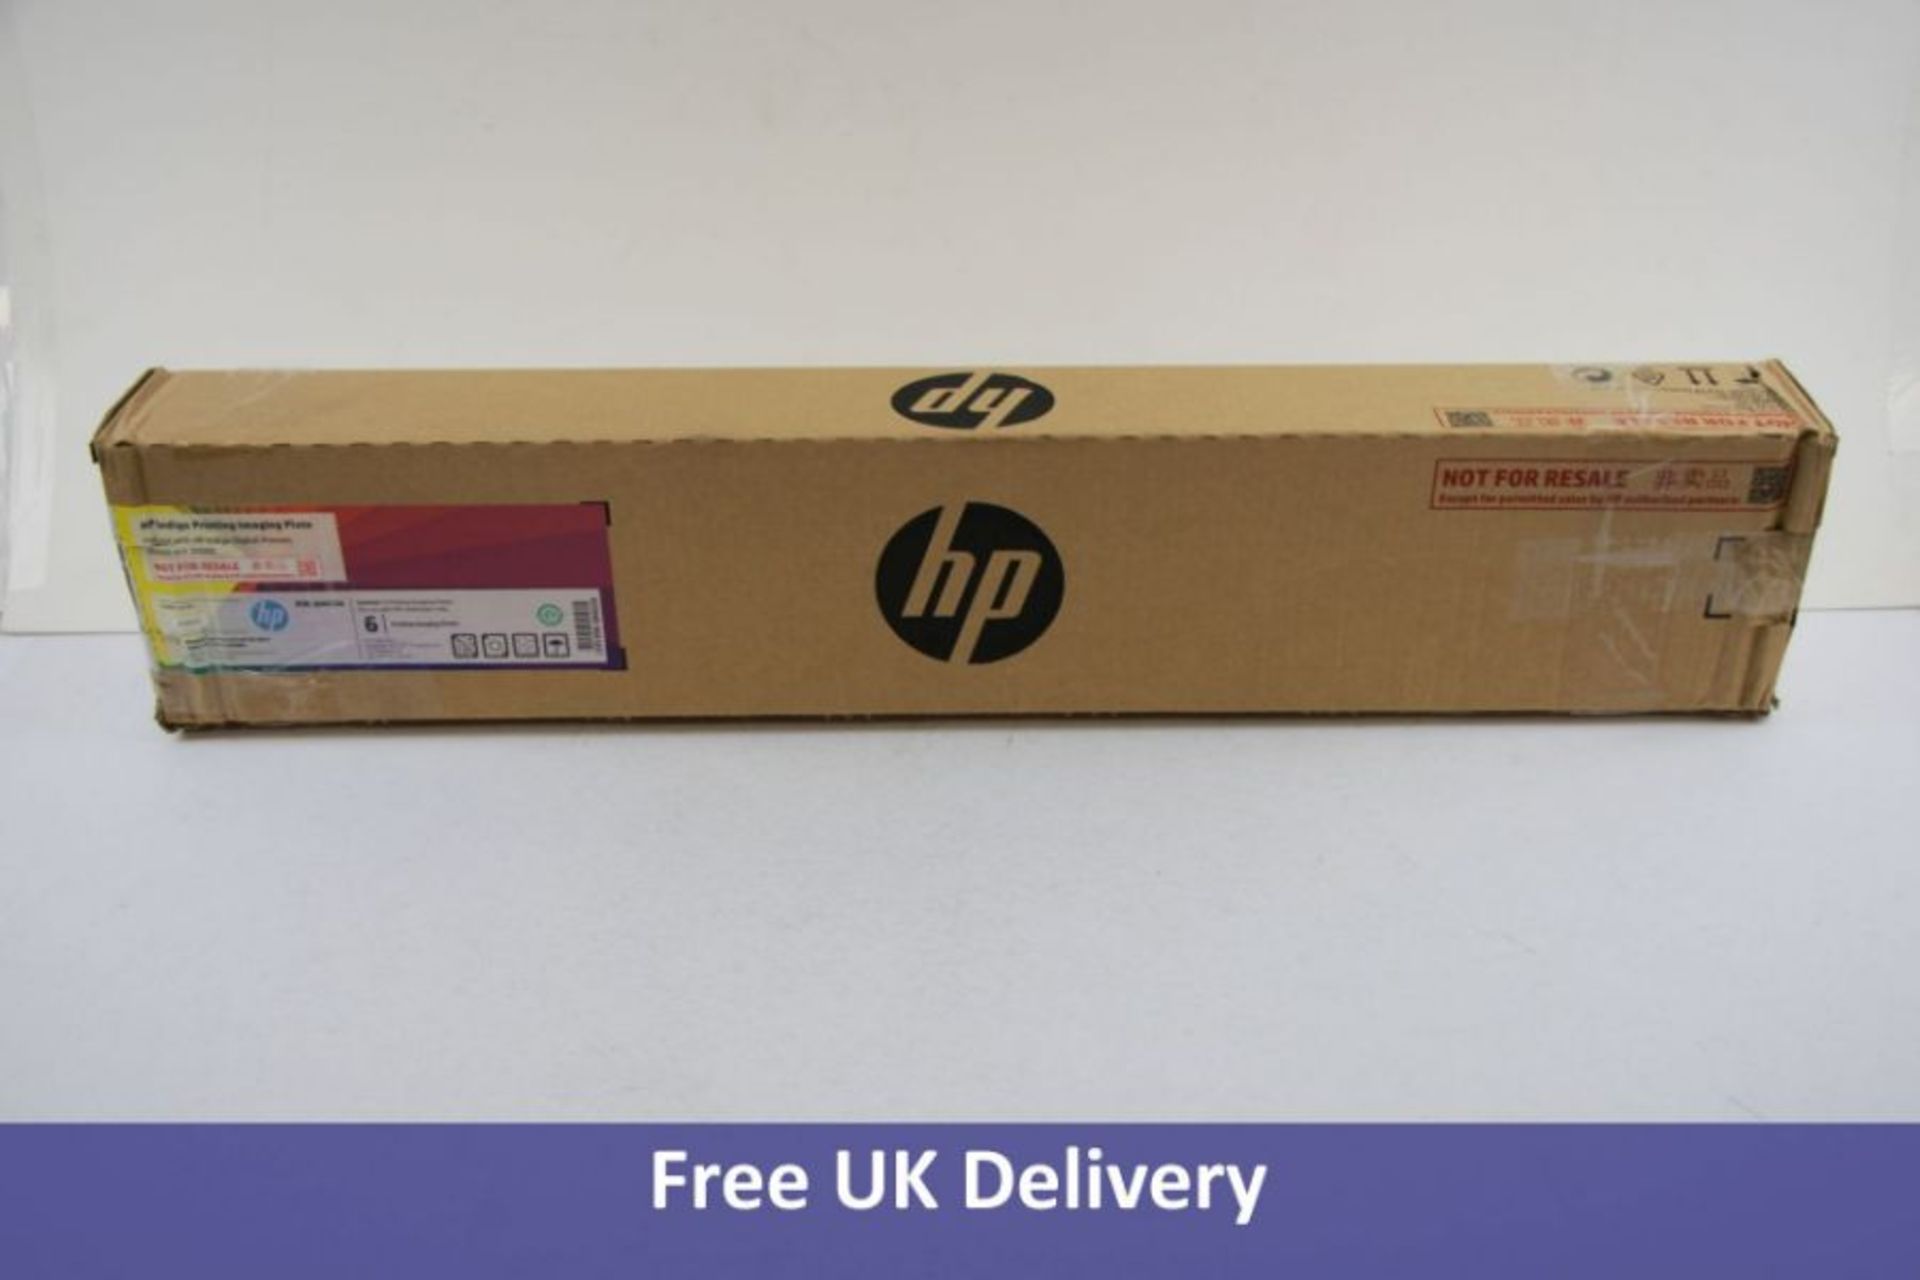 HP indigo Printing Imaging Plate, Q4407A, for Series 3000,4000 and 5000 - 6 PIP